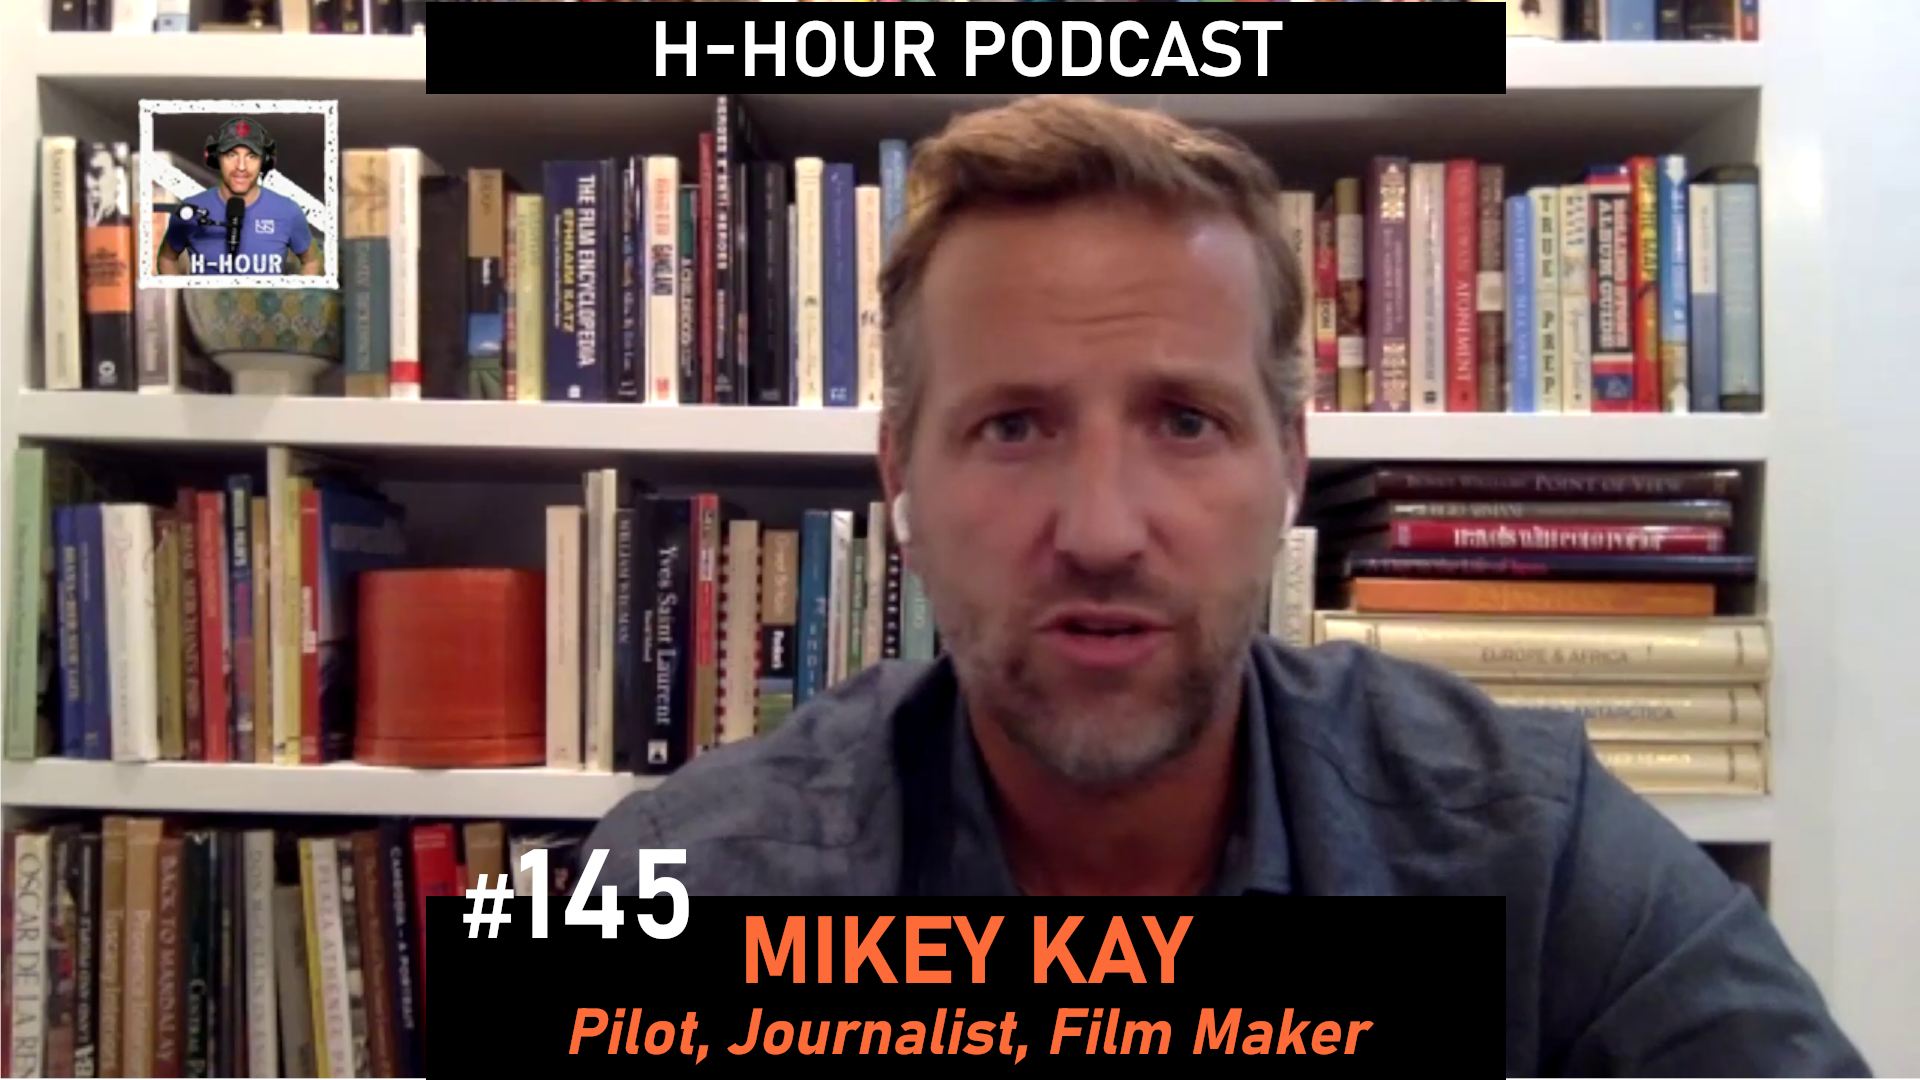 mikey kay journalist on h-hour podcast